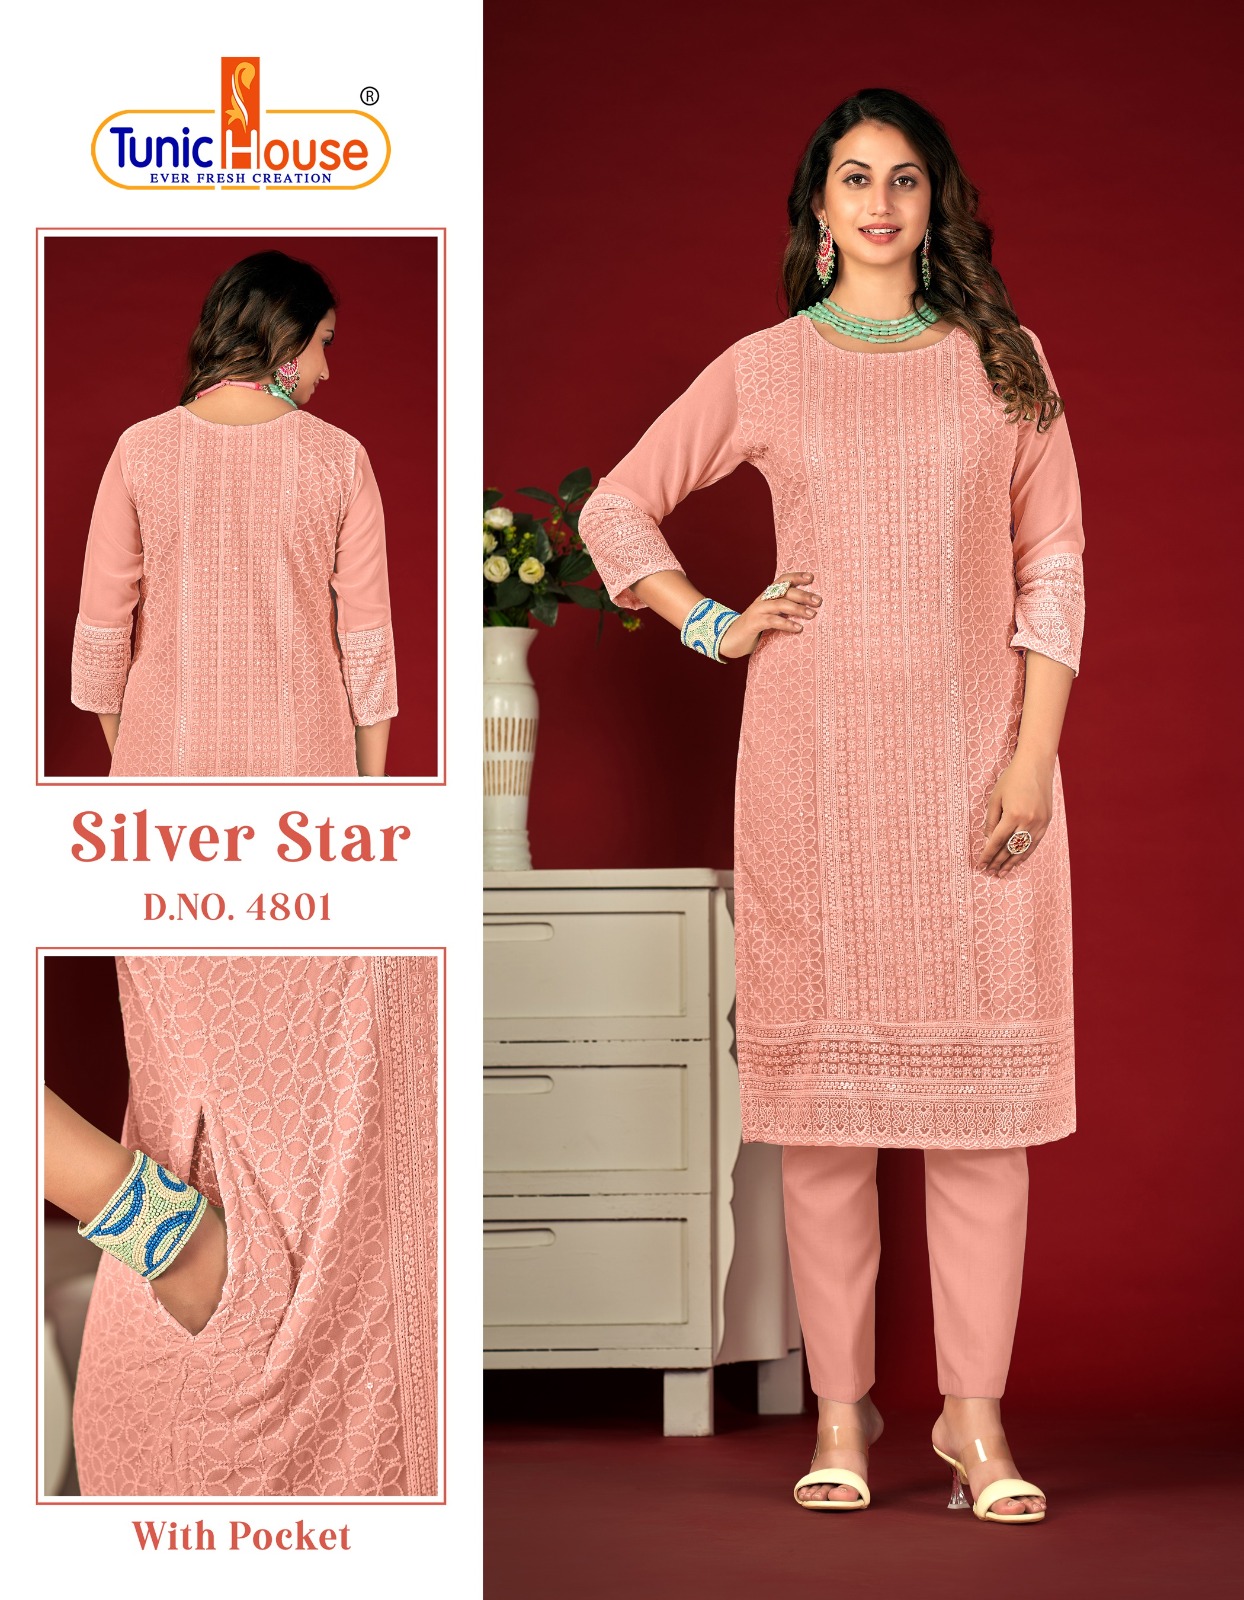 Tunic Houes Silver Star collection 9